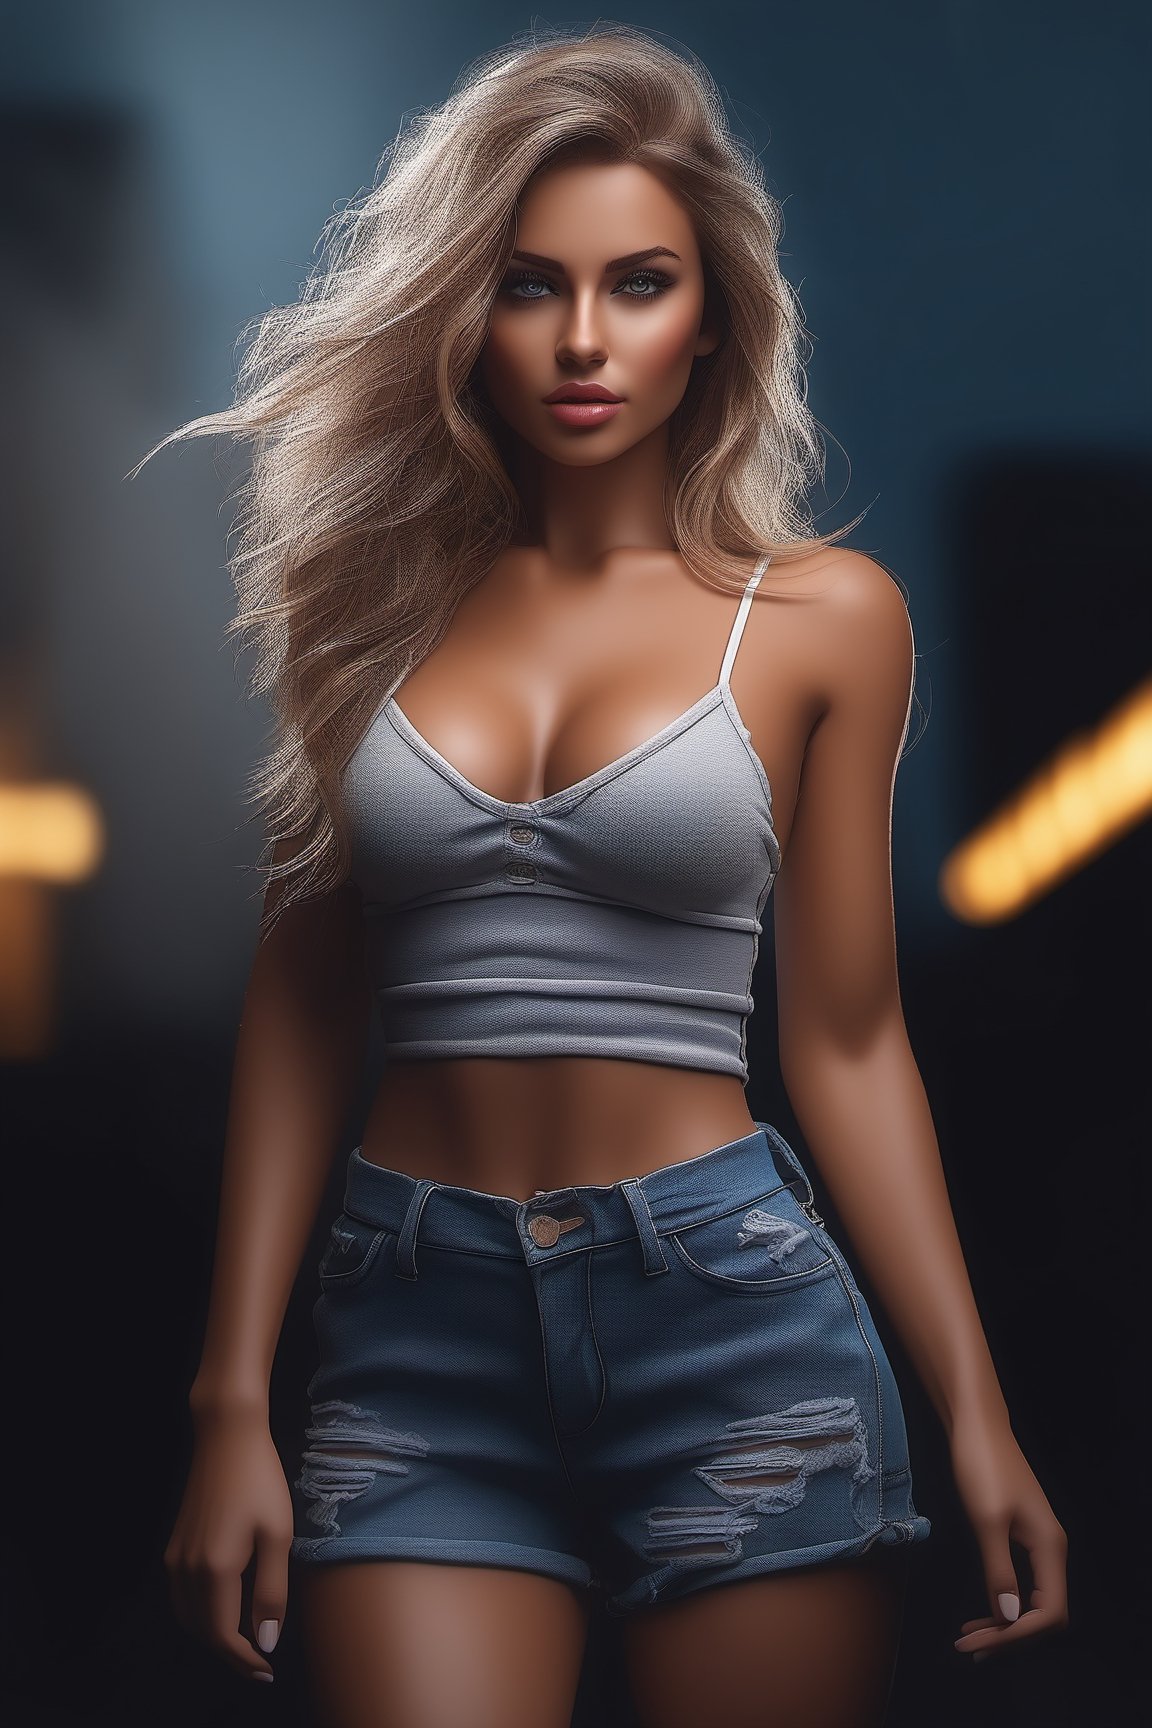 Epic Poses (Full Body Photo: 1.5), (Front View: 1.2), (Masterpiece: 1.1), Standing, High Heels, Outside, 1 Woman, 27 Year Old Sexy Sensual Body, Blonde, Long Wavy Hair and messy, Ultra-realistic super defined, hyper-realistic and hyper-detailed face, ((detailed skin texture, 1.5 pores)), (looking flirtatiously at viewers), detailed and noise-free focused face, detailed eyes, detailed lips, ((taken with a 70 x 200 2.5 lens)) beautiful face, 16k, FHD, 8K, masterpiece, raw photo, best quality, photorealistic, highly detailed CG Unity 8k wallpaper, depth of field, cinematic light, realism, extremely realistic (full long photo: 1.3), (walking and posing outside), in a warm semi-rainy and humid environment, areas semi-lit by afternoon light, intricate (dense fog, fog, mist: 1.3), dressed wearing super hot shorts, crop top above low-cut navel highlighting her body figure, beautiful detailed legs, showing her beauty, outdoors, artwork, smoking a cigarette, looking flirtatious at the camera, tall resolution, 4k, 8k, highly detailed fingers and nails, super detailed voice, extremely detailed, different poses, realistic, light on the face, cinematic lighting, super detailed eyes  perfect eyes Professional, modern, product focused , commercial, eye-catching, very detailed